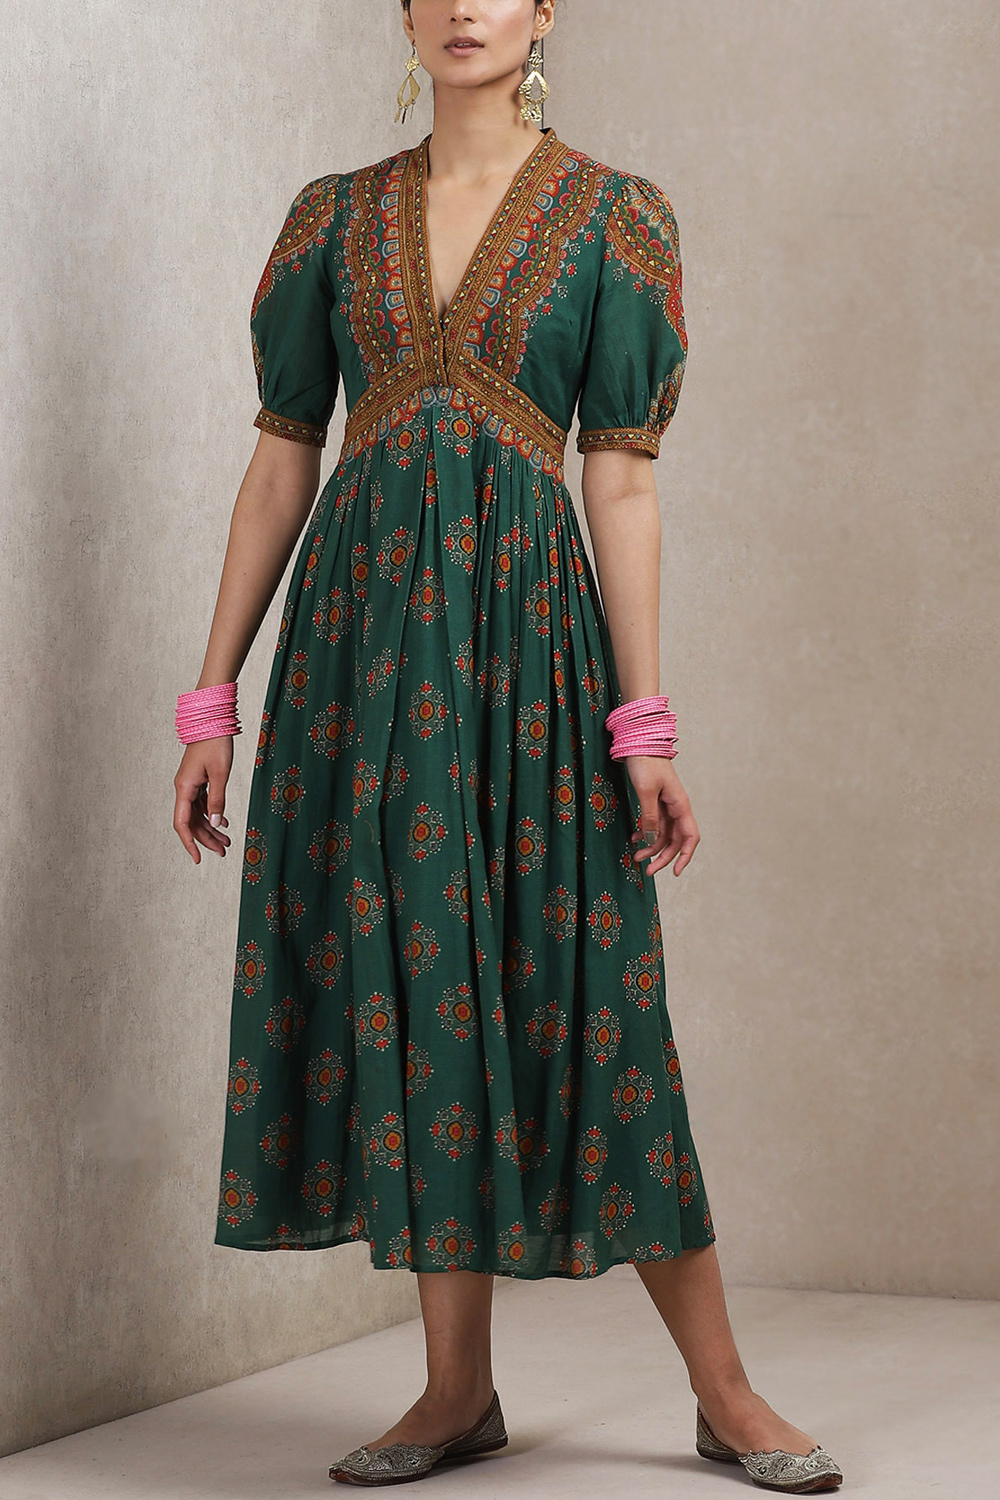 Green floral printed dress designed by ...